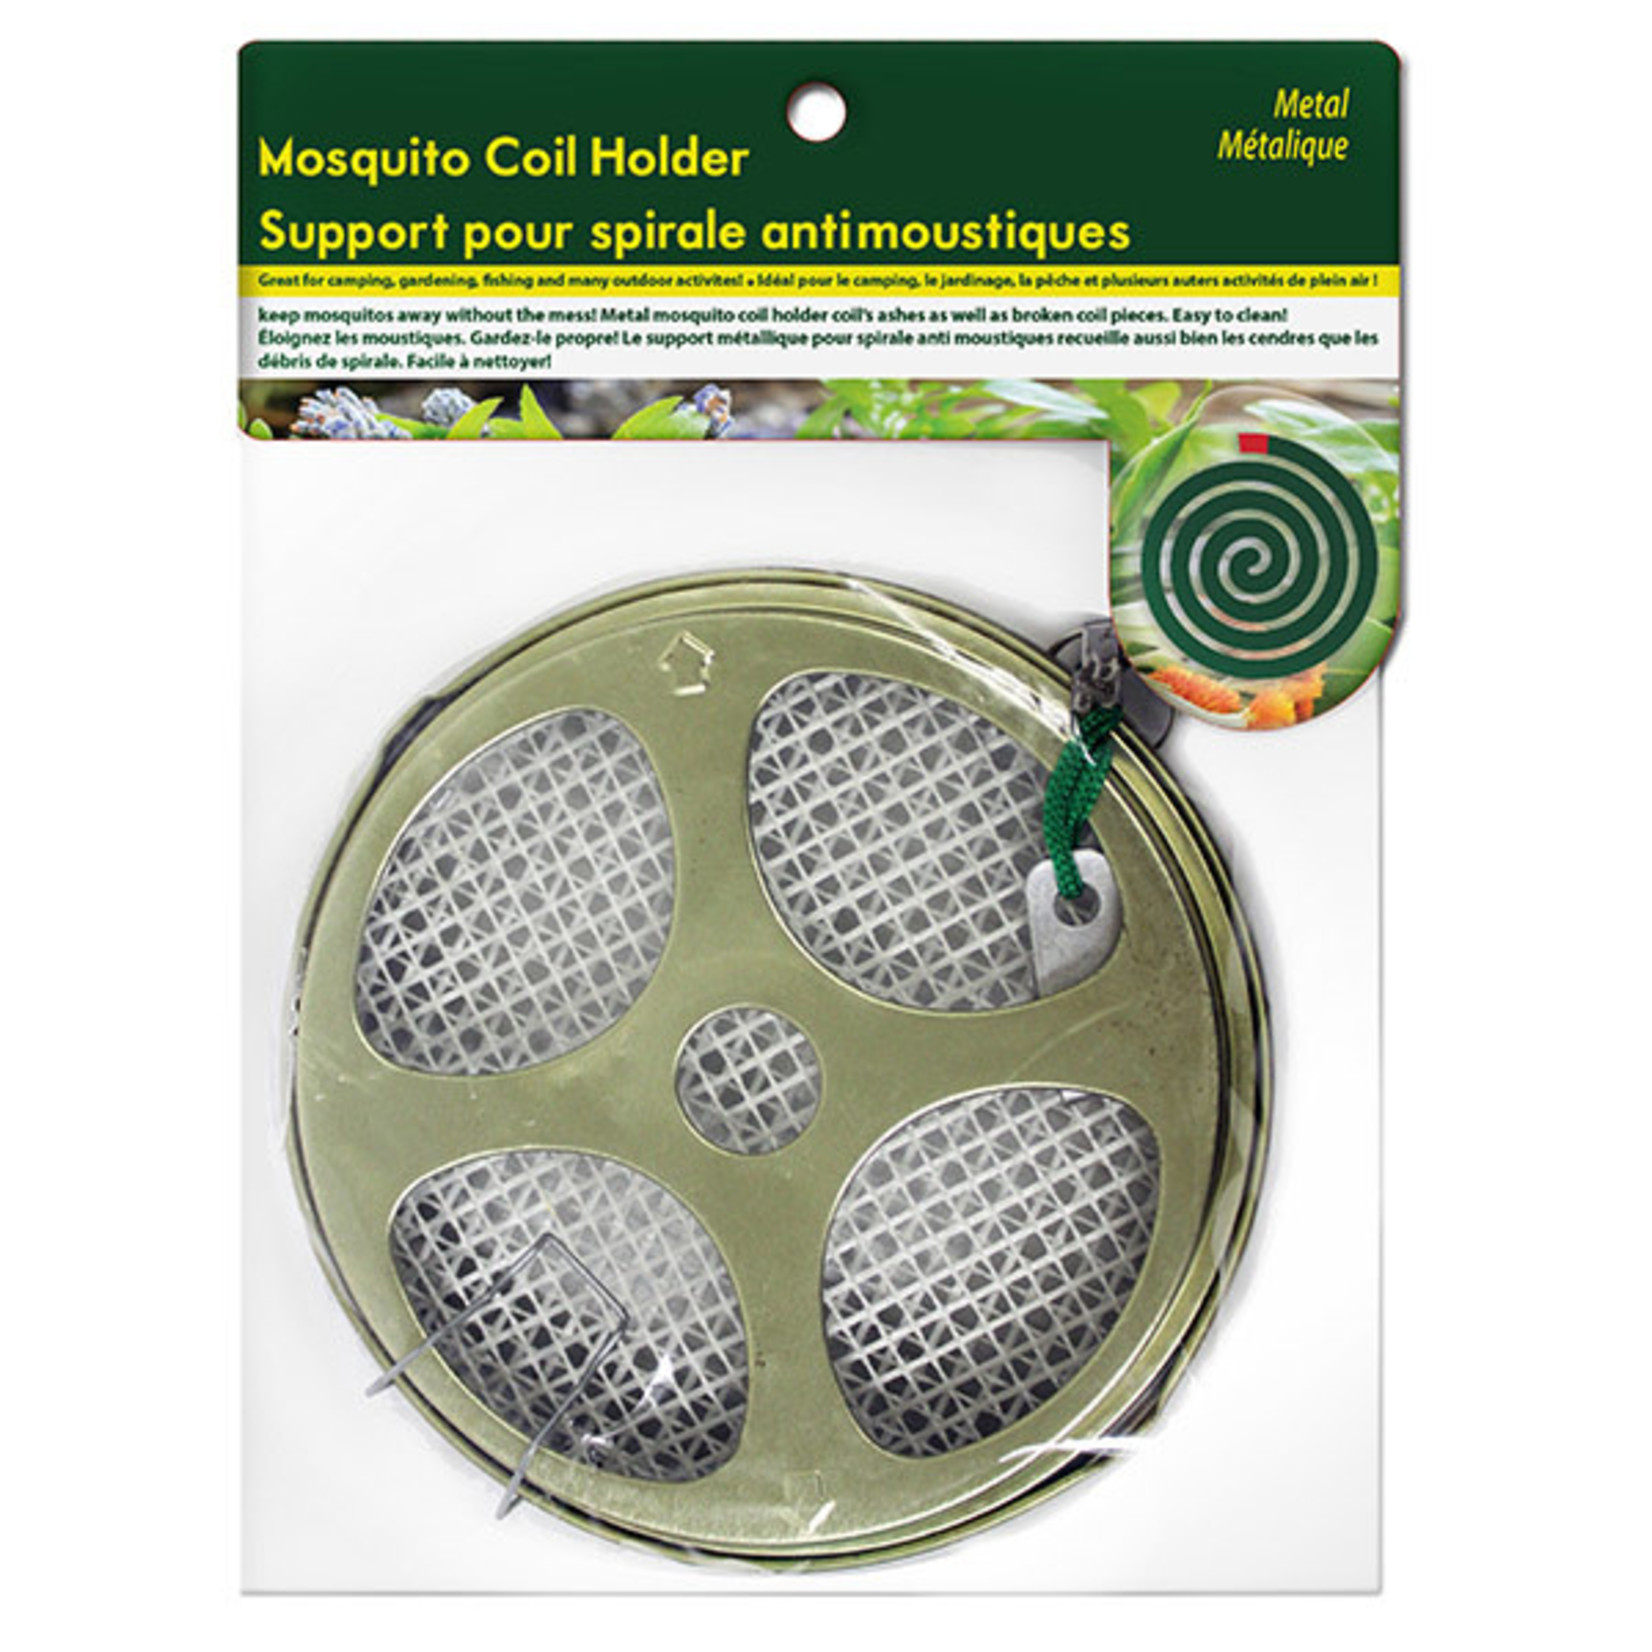 MOSQUITO COIL HOLDER METAL